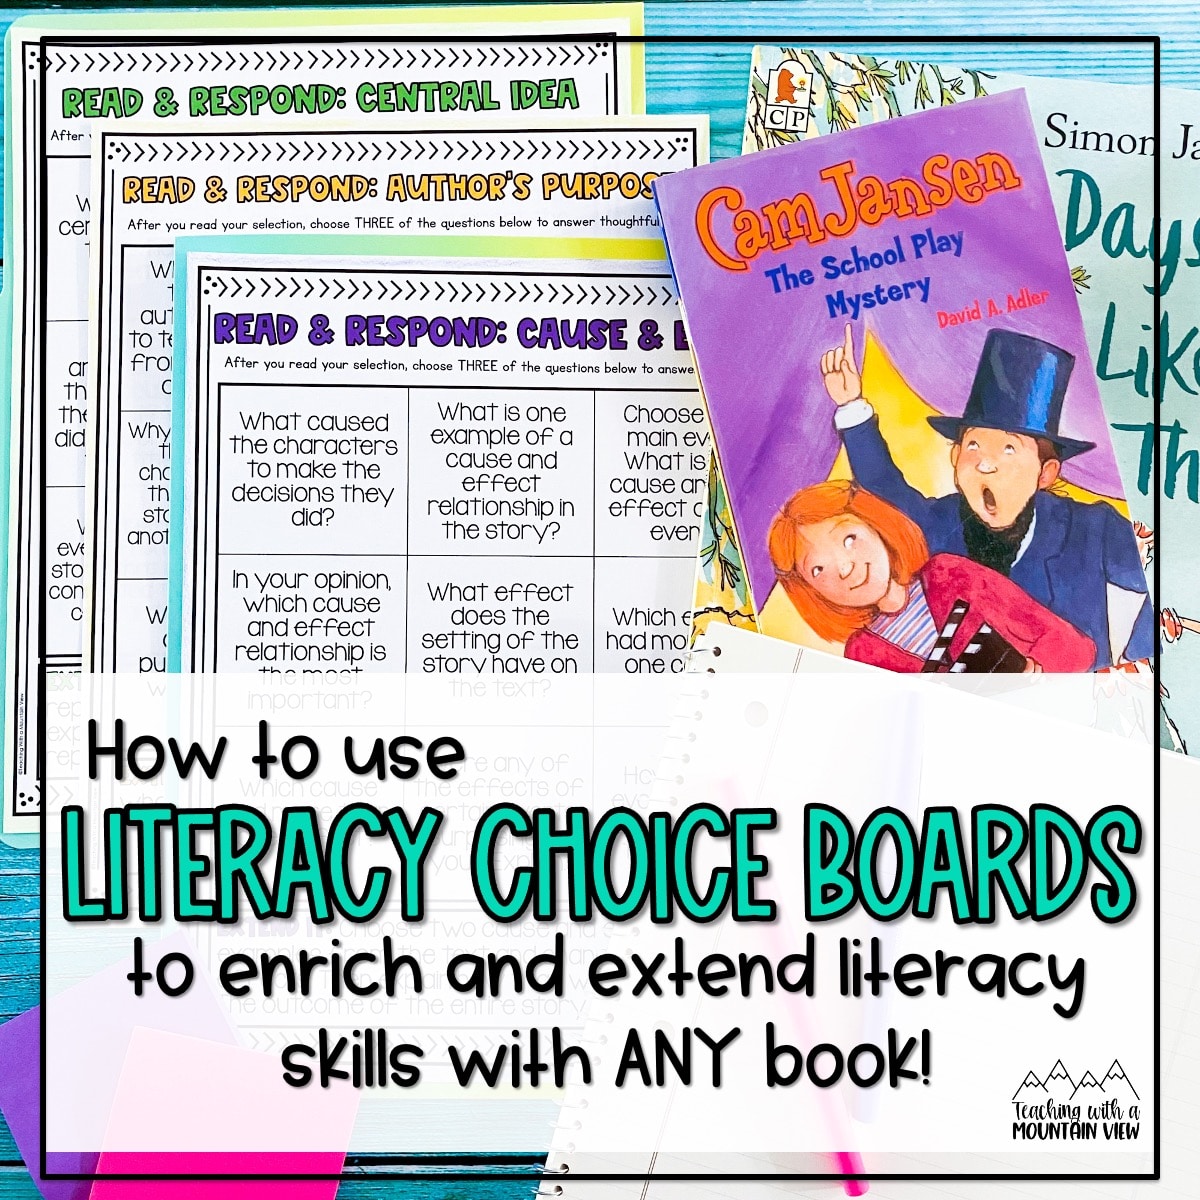 Literacy choice boards increase comprehension and accountability during novel studies. These work with ANY book and work for assessment too.